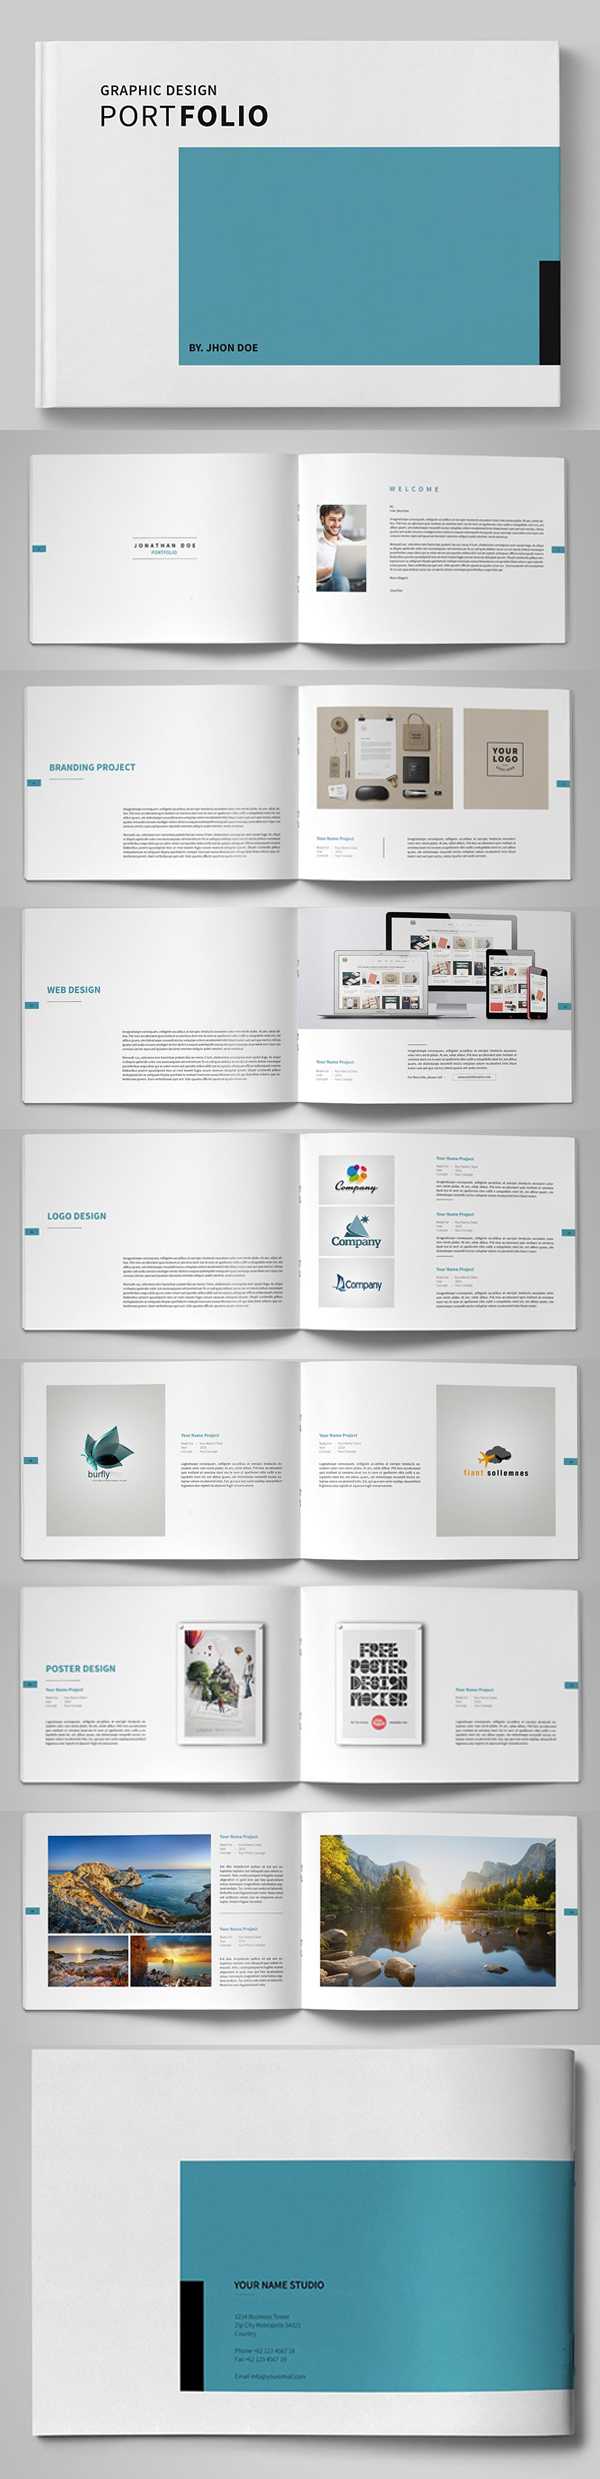 20 New Professional Catalog Brochure Templates | Design With Regard To Indesign Templates Free Download Brochure